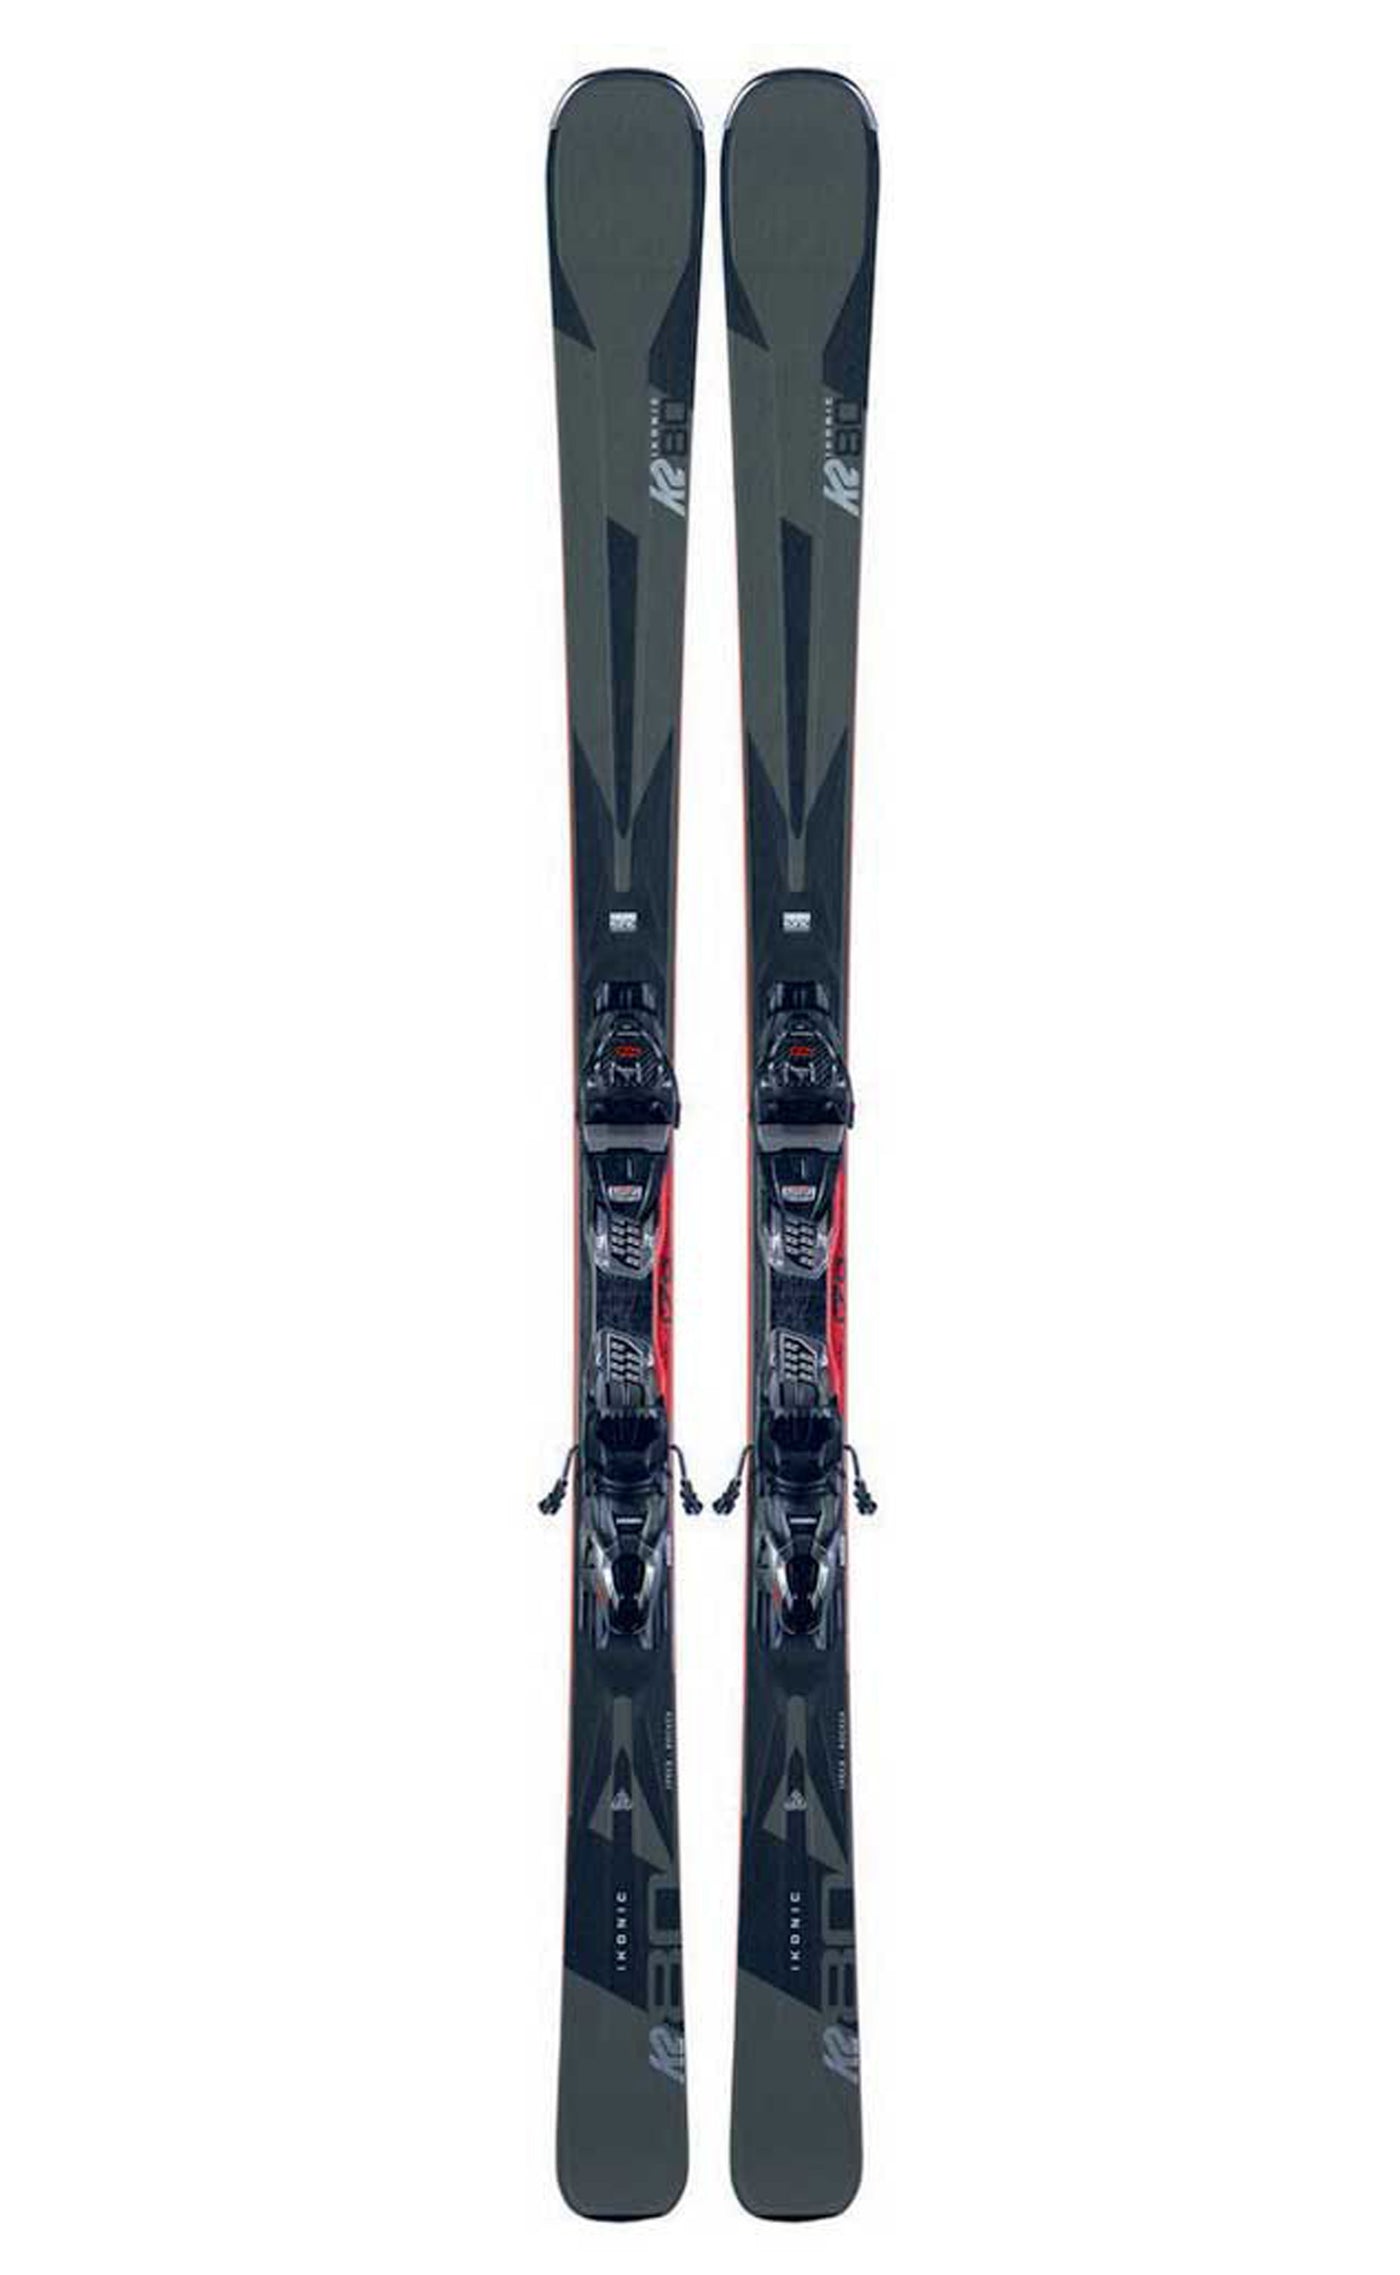 SKIS K2 IKONIC 80 SKIS + M3 10 COMPACT QUICKCLICK BINDINGS 2020 - Alleydesigns  Pty Ltd                                             ABN: 44165571264